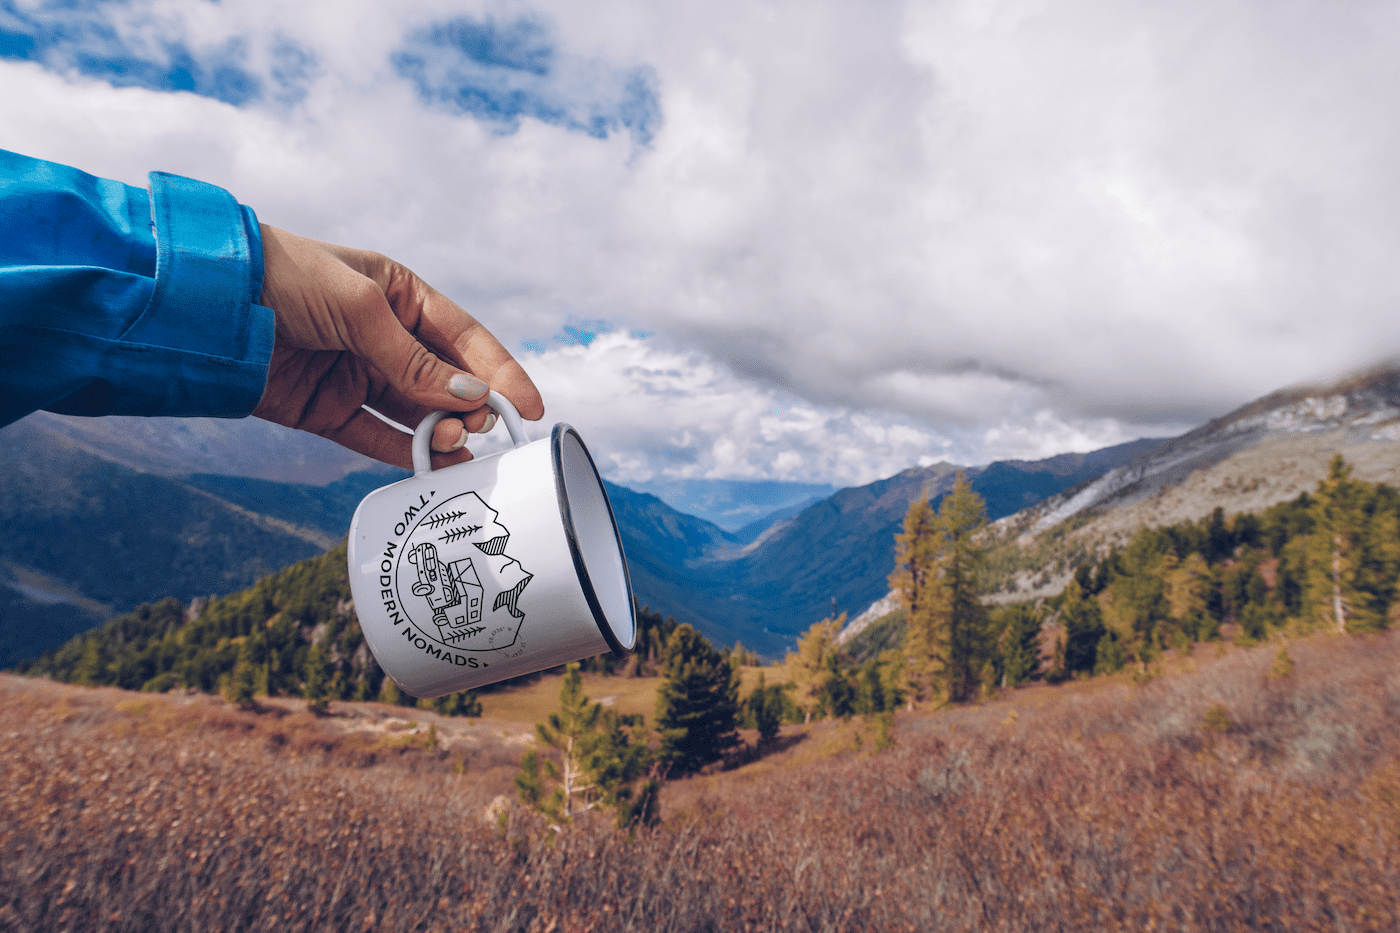 hand holding white metal mug with brand logo andname printed. Landscape background